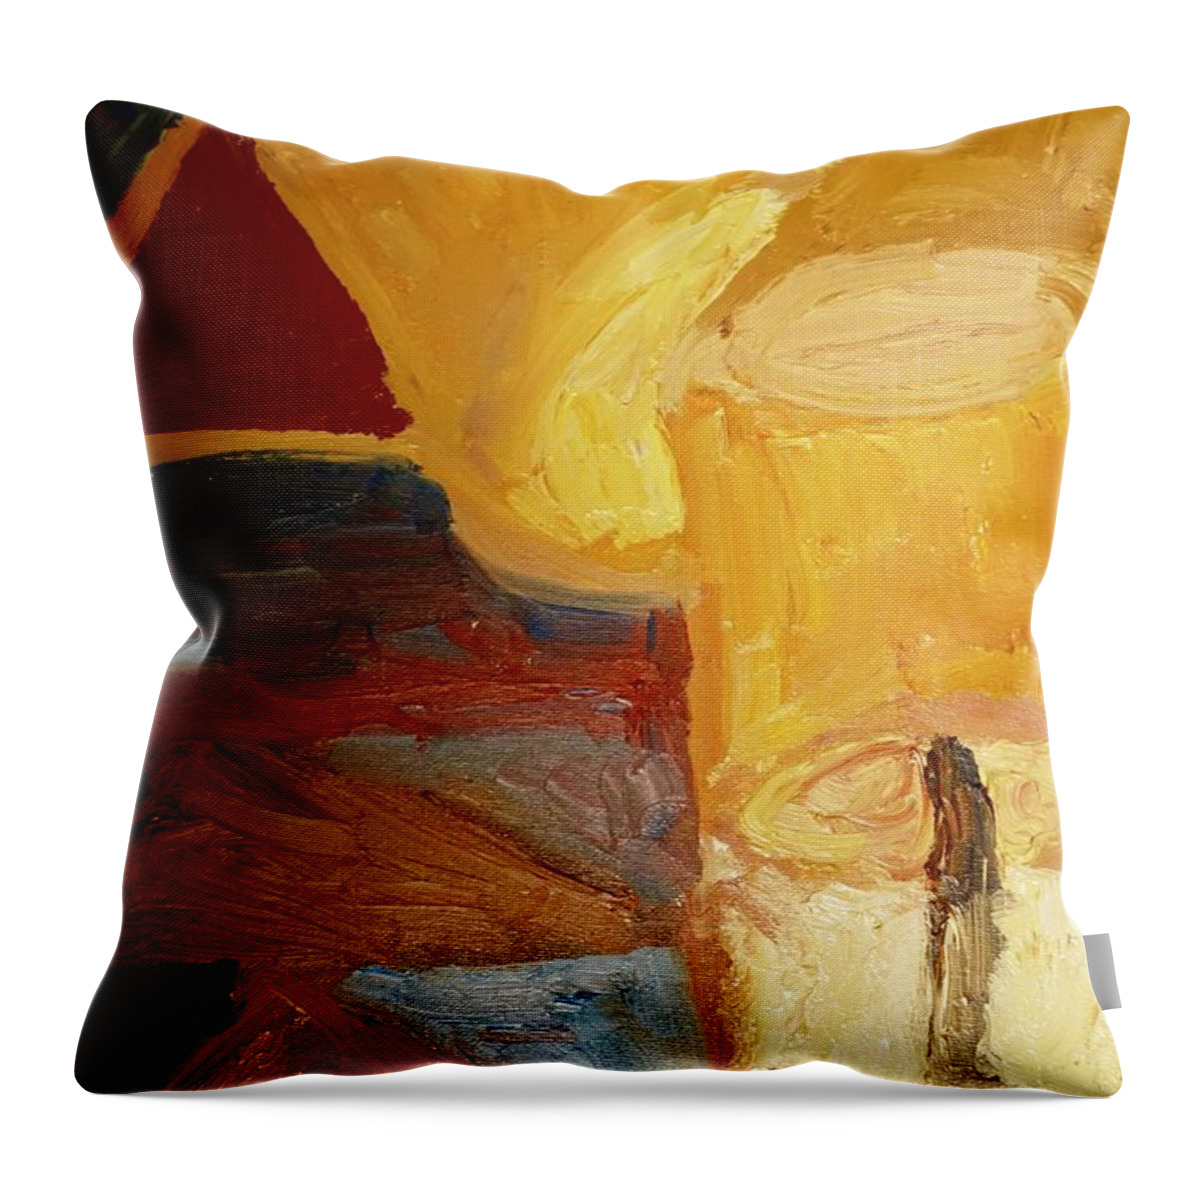 Lamps Throw Pillow featuring the painting Lamps in Color by Shea Holliman